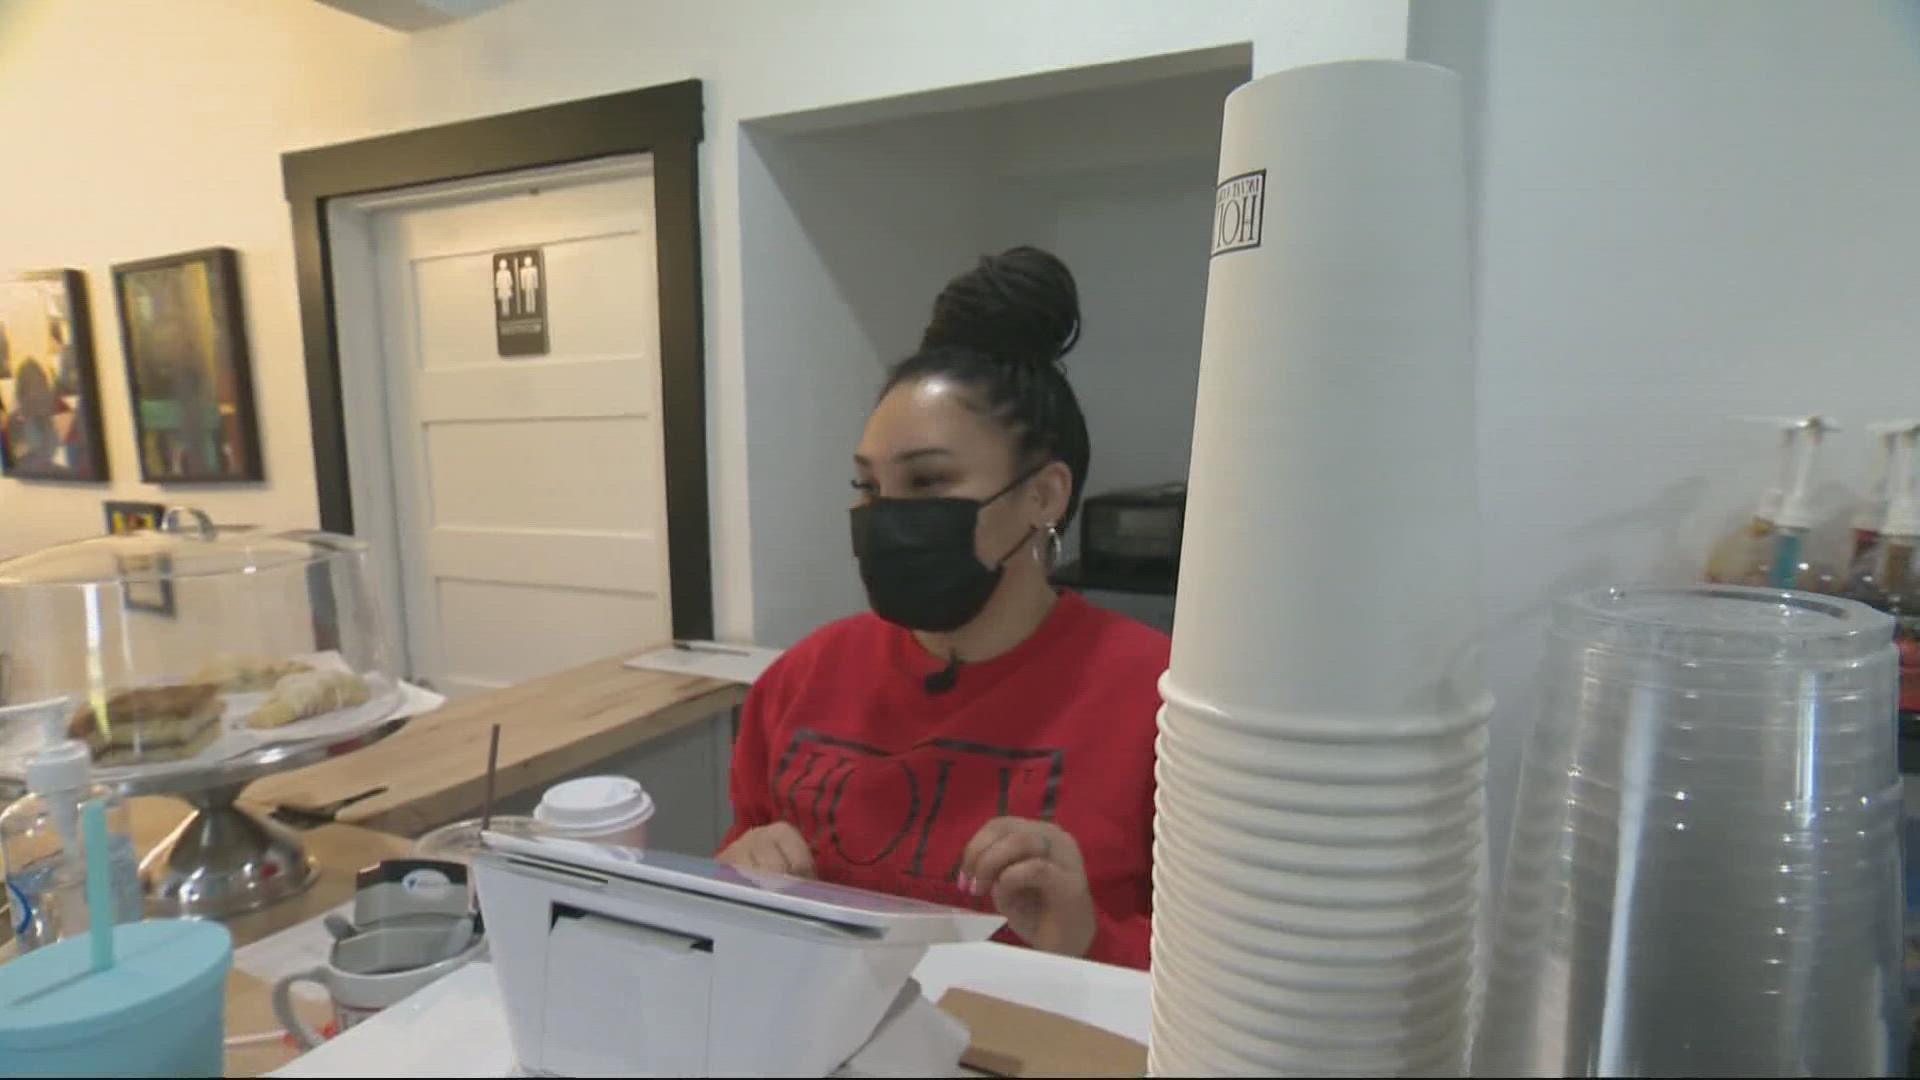 Shalimar Williams, who was released from prison in 2008, worked hard to turn her life around and now runs a coffee shop helping others who need a hand.